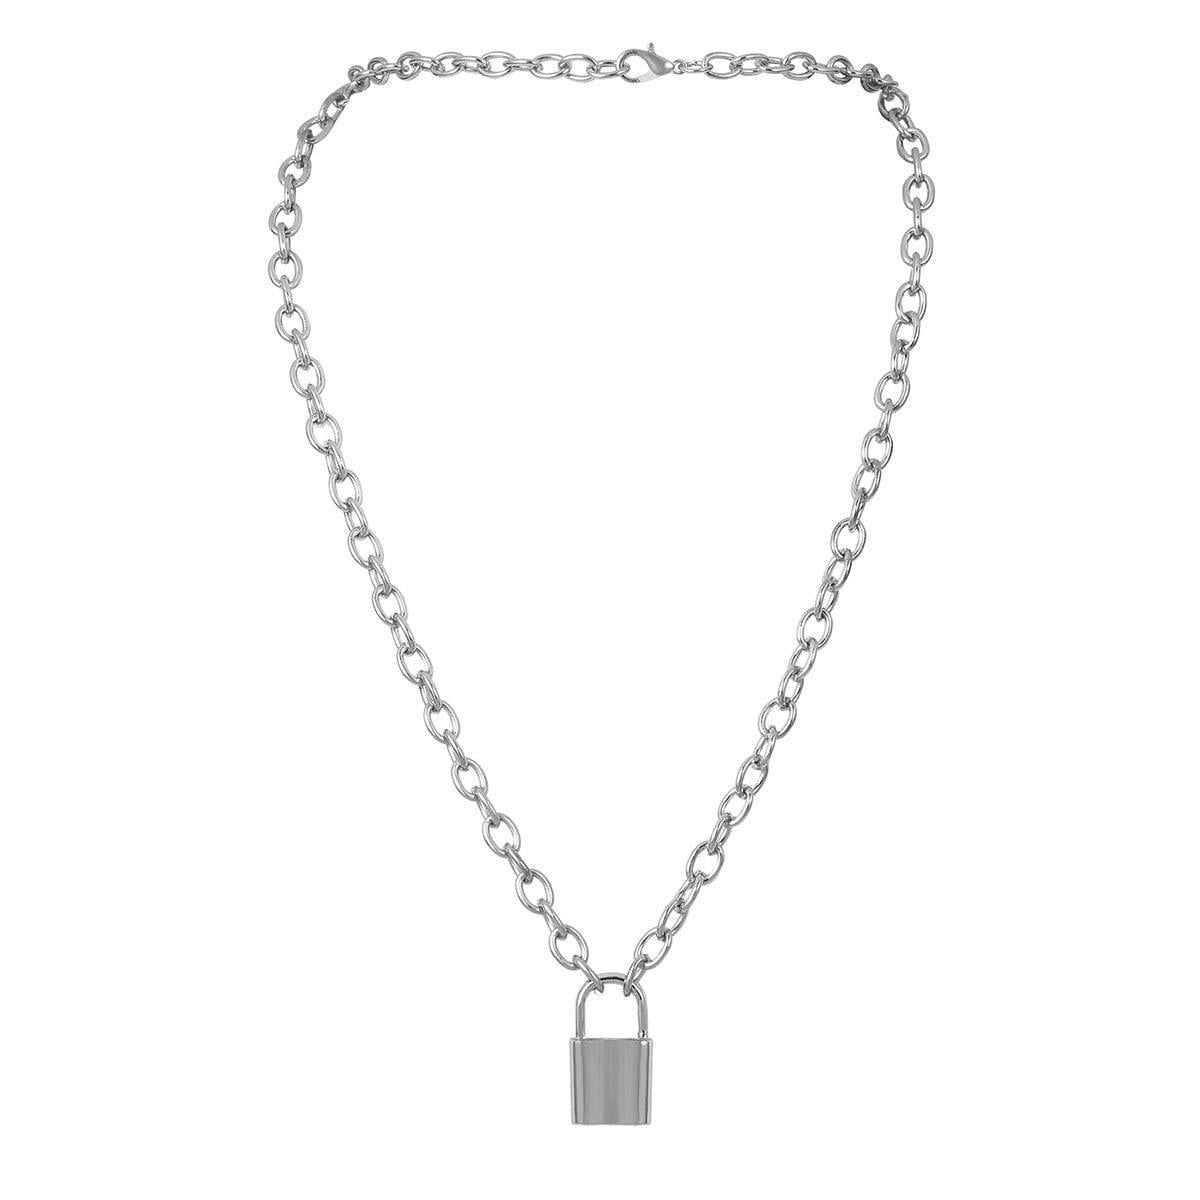 Qiuseadu 7th Moon Lock Pendant Necklace Statement Long Chain Punk  Multilayer Choker Necklace for Women Girls (Silver)